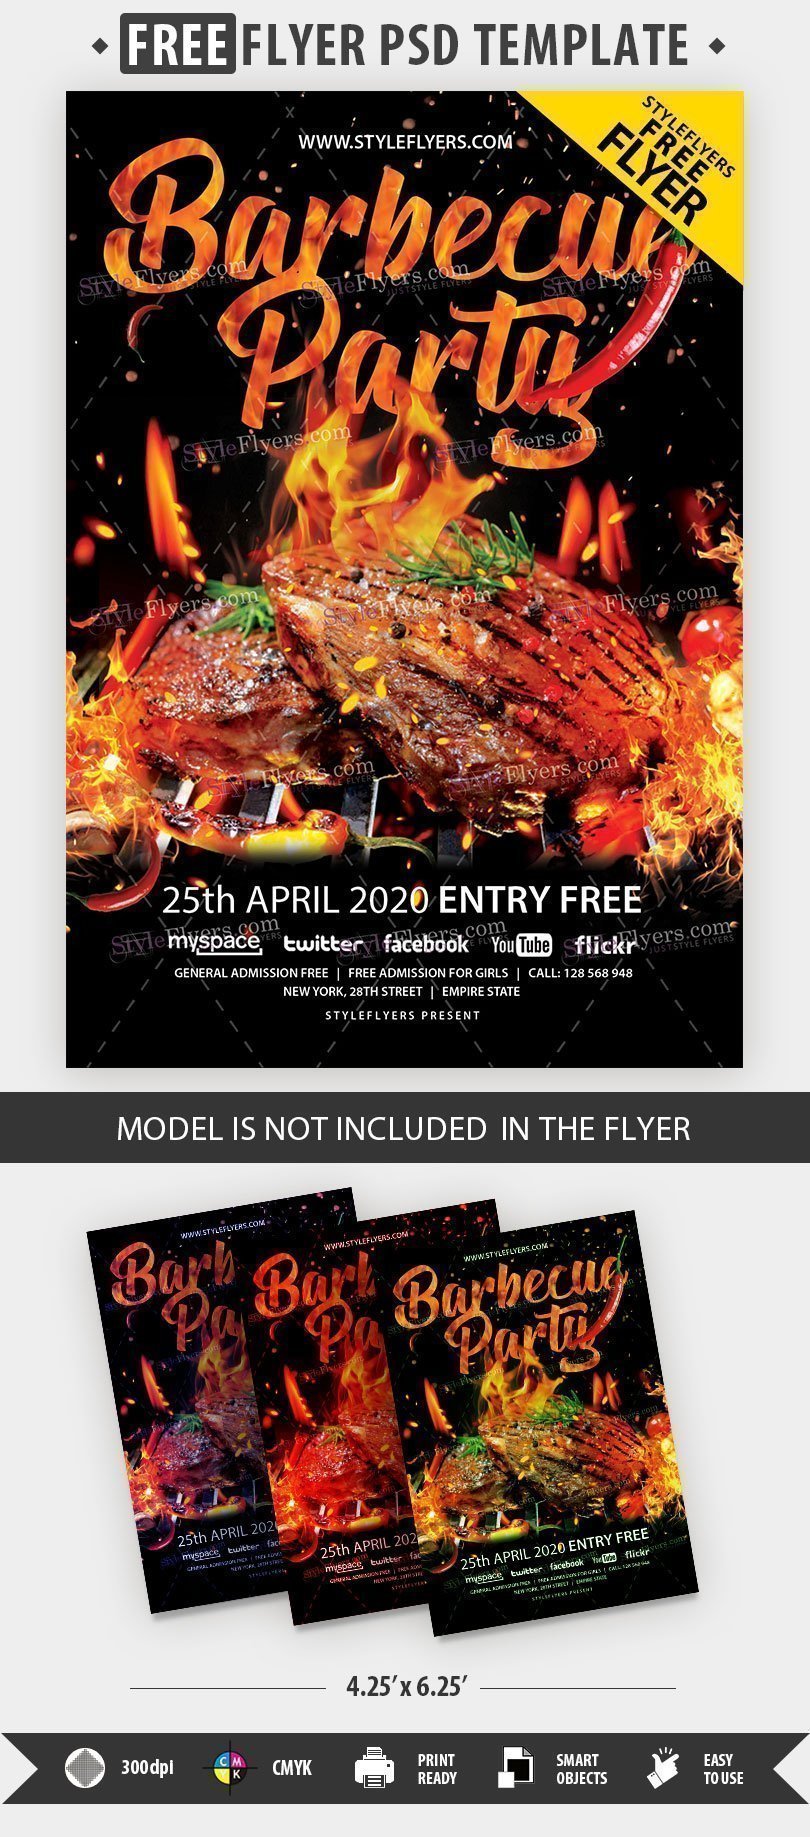 barbecue-party-free-psd-flyer-template-free-download-34873-styleflyers